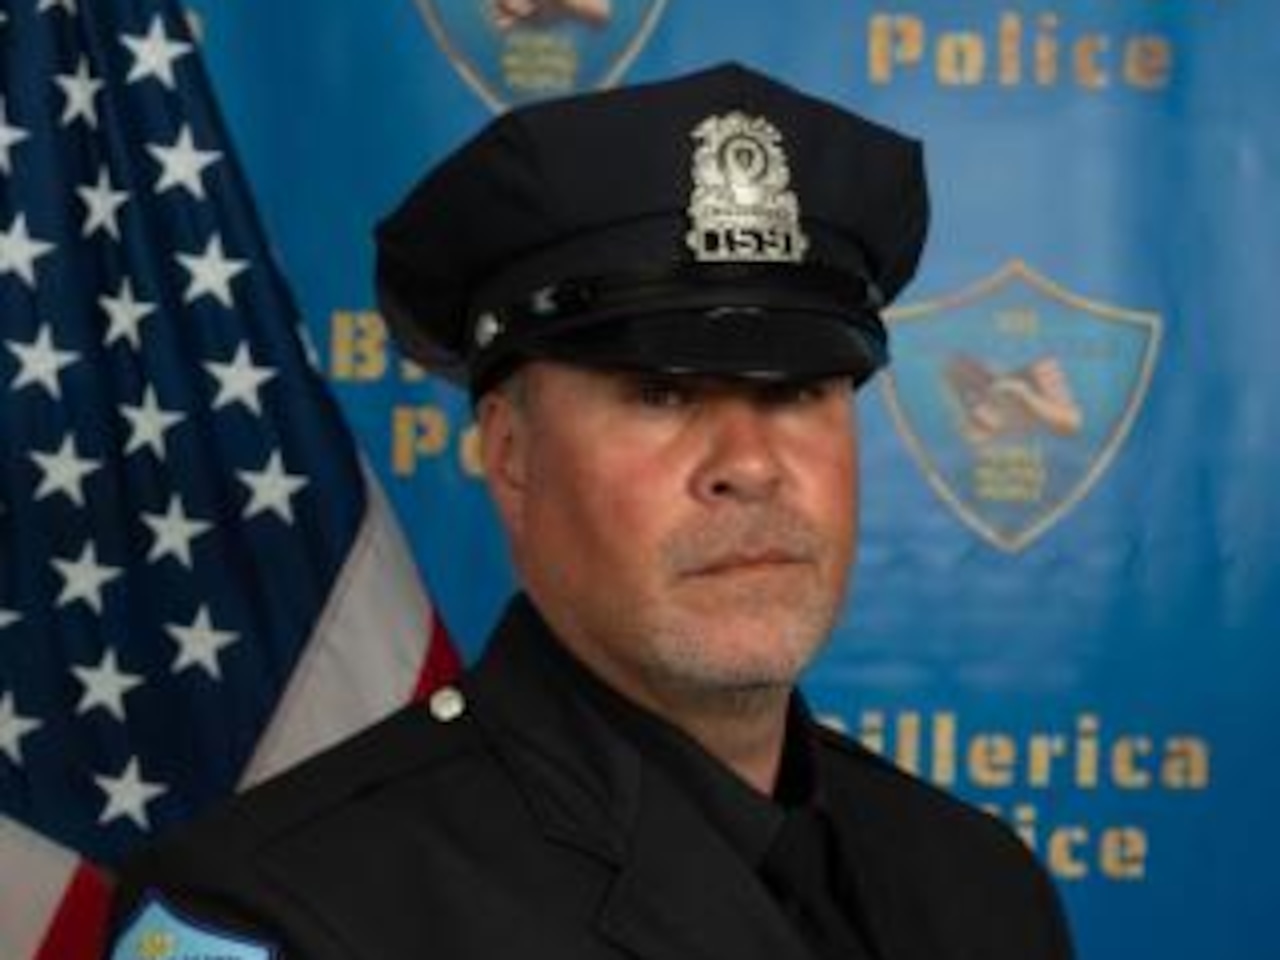 Police organizations mourn Billerica sergeant killed at construction site [Video]